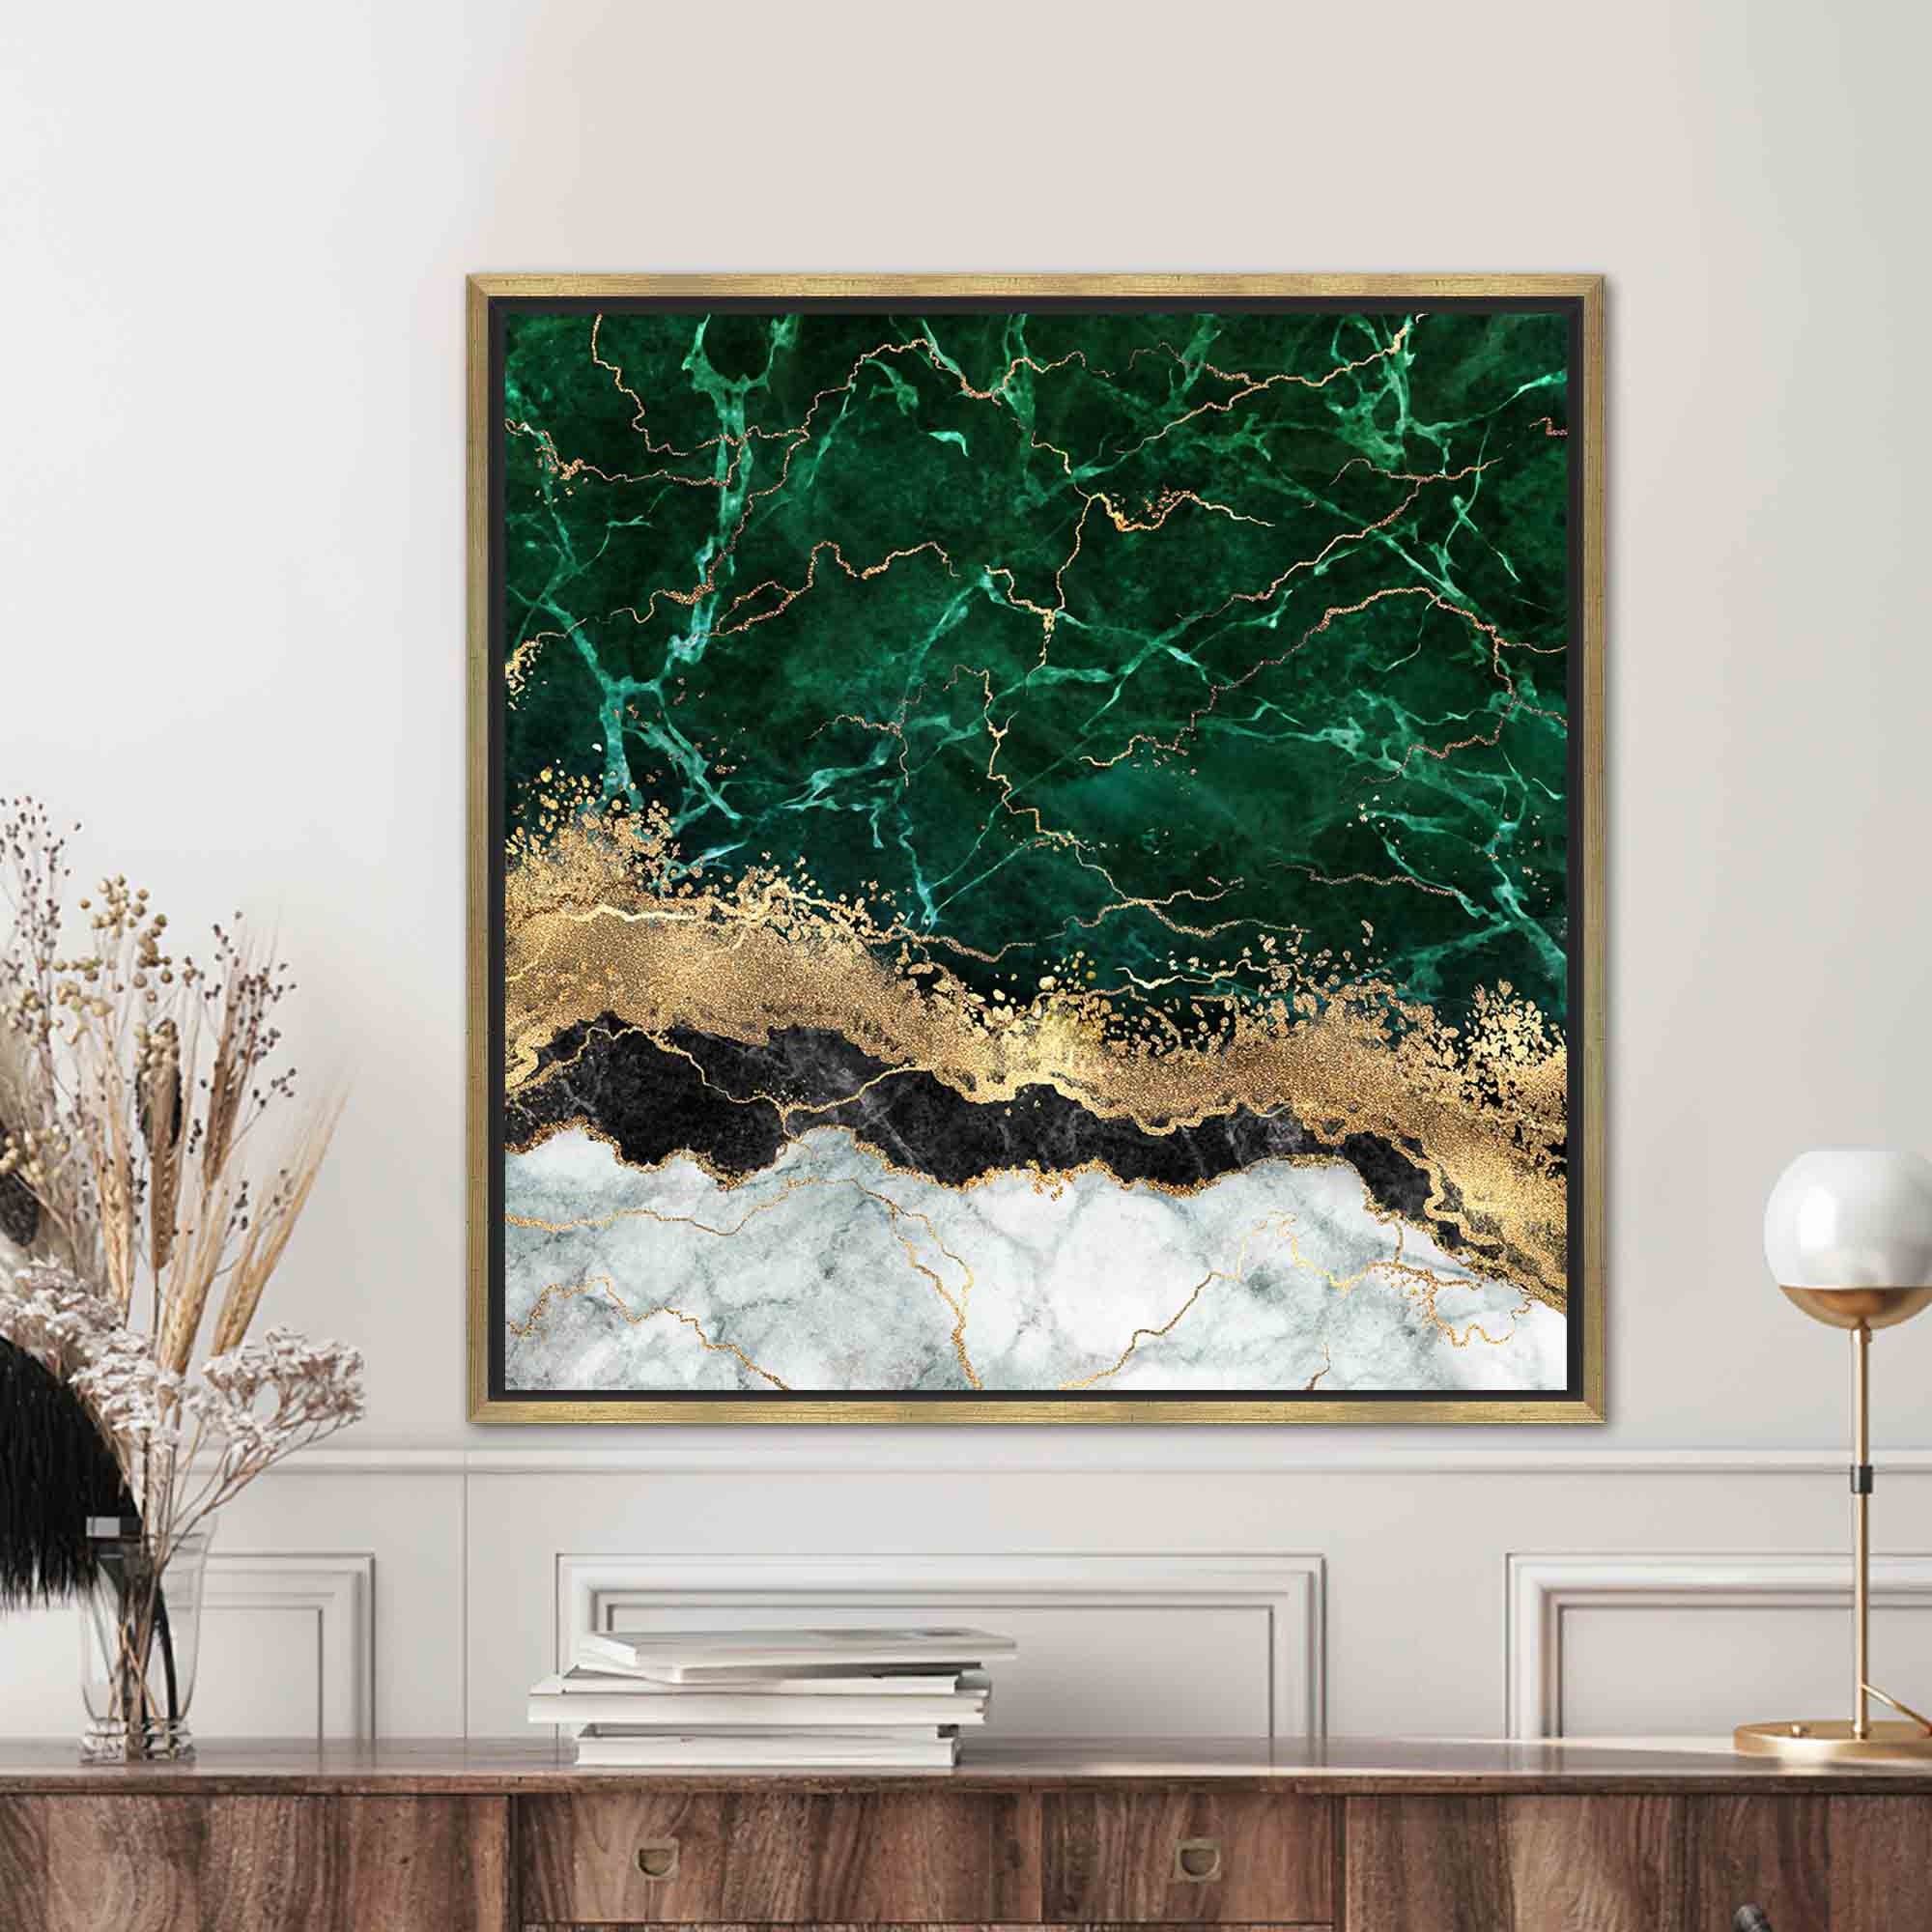 Glass Gold Denmark Marble , Marble Gold Wall Green Print, Art, Marble Art, Wall Canvas Green Etsy Canvas Wall Art Art, Canvas, - Art, Marble Glass Tempered